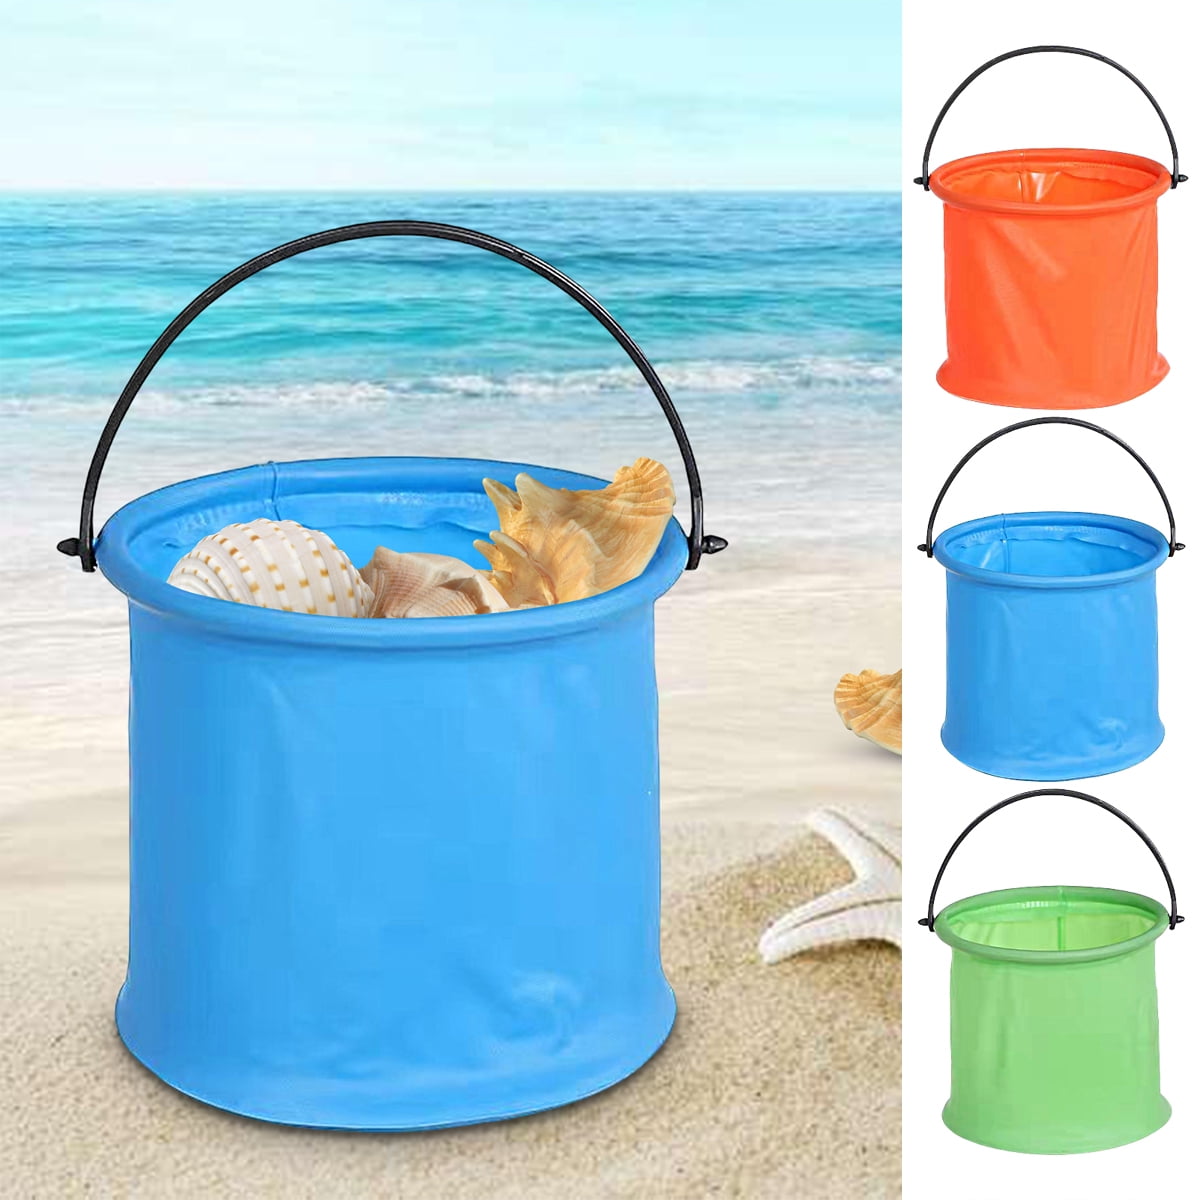 Facibom 3PCS Foldable Bucket Foldable Pail Bucket Sand Buckets Silicone Collapsible Bucket for Kids Beach Camping 2L 